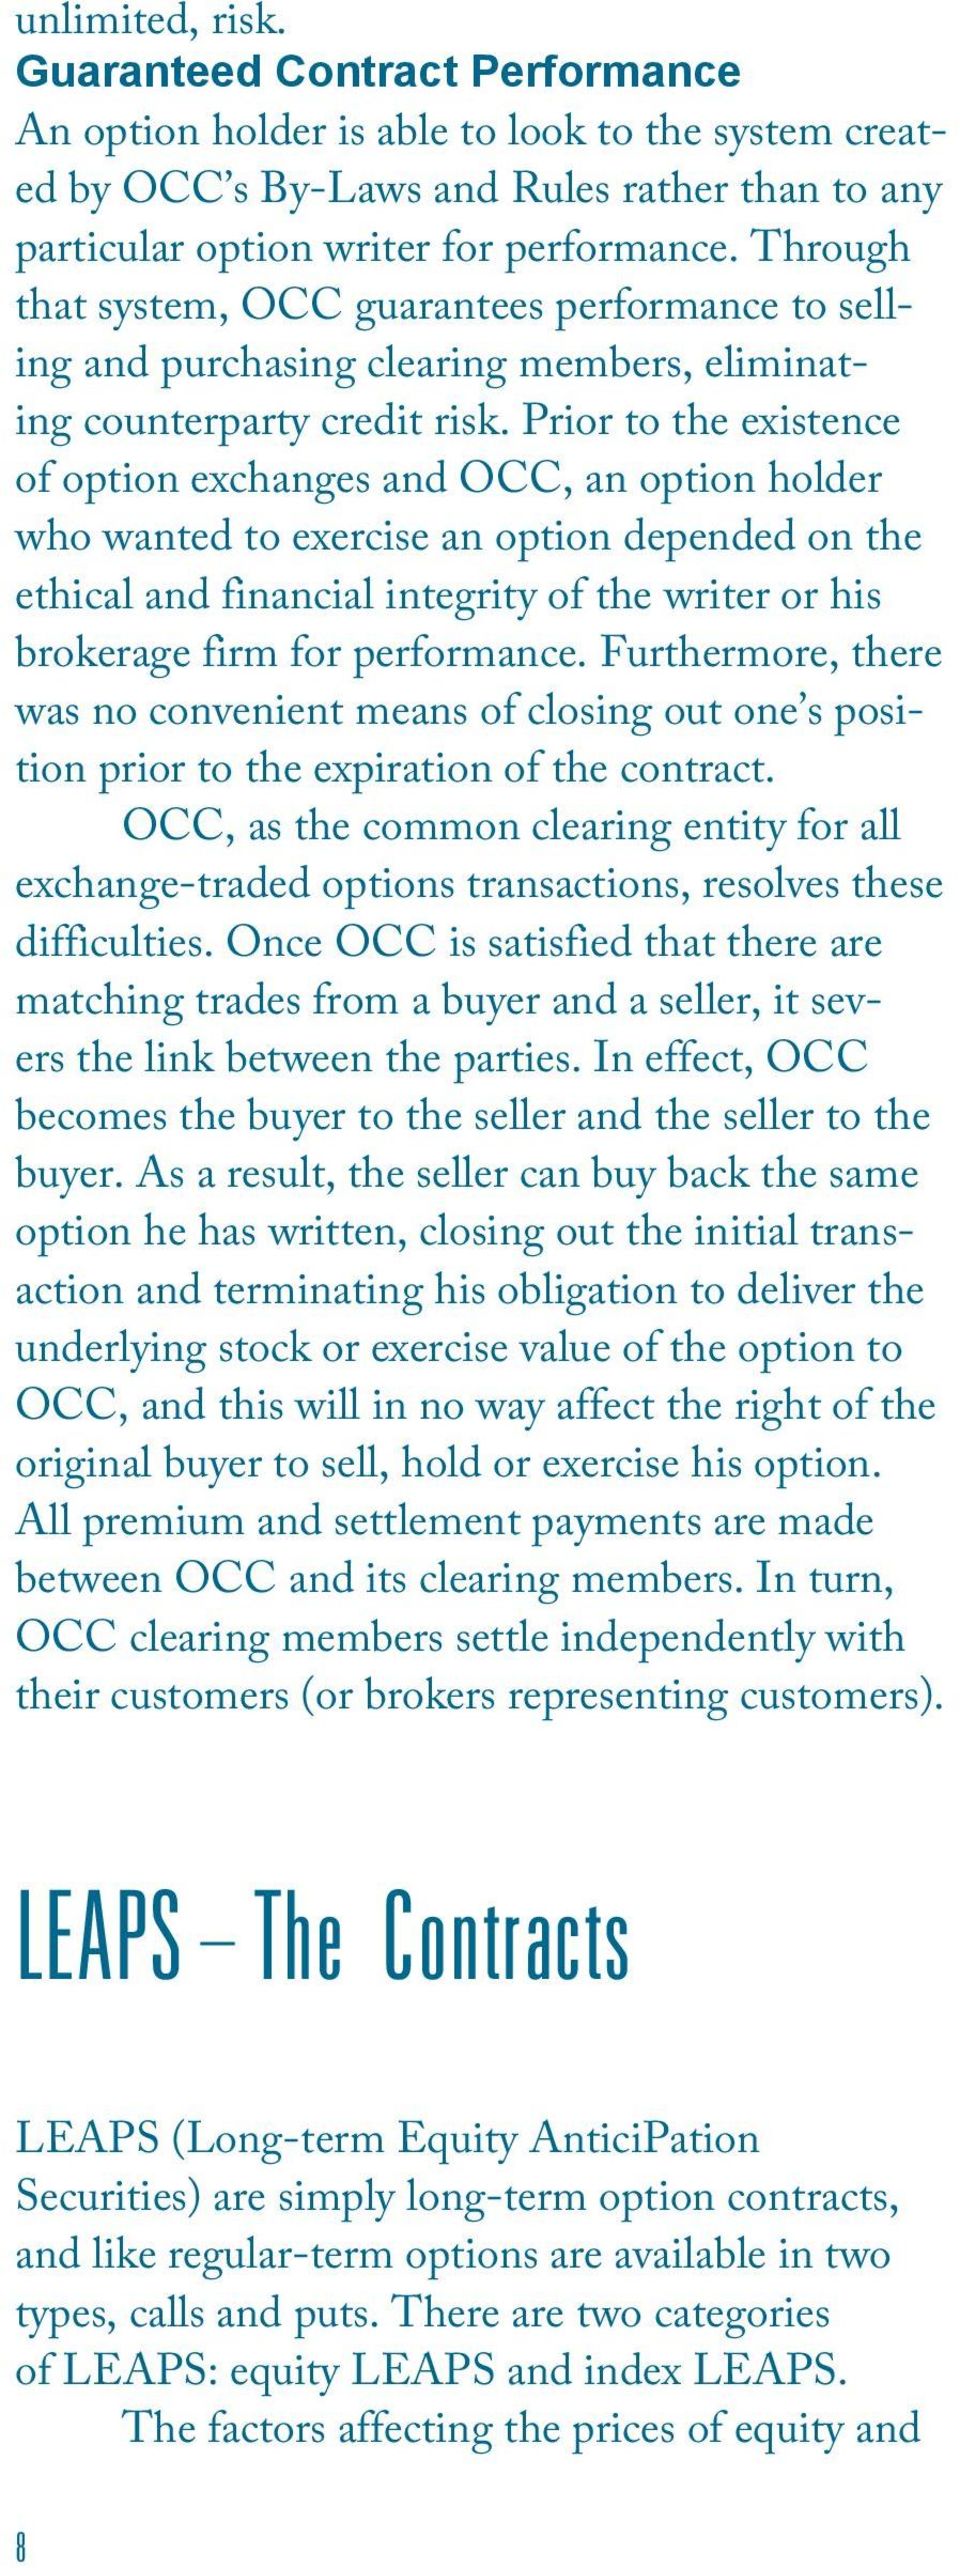 Prior to the existence of option exchanges and OCC, an option holder who wanted to exercise an option depended on the ethical and financial integrity of the writer or his brokerage firm for